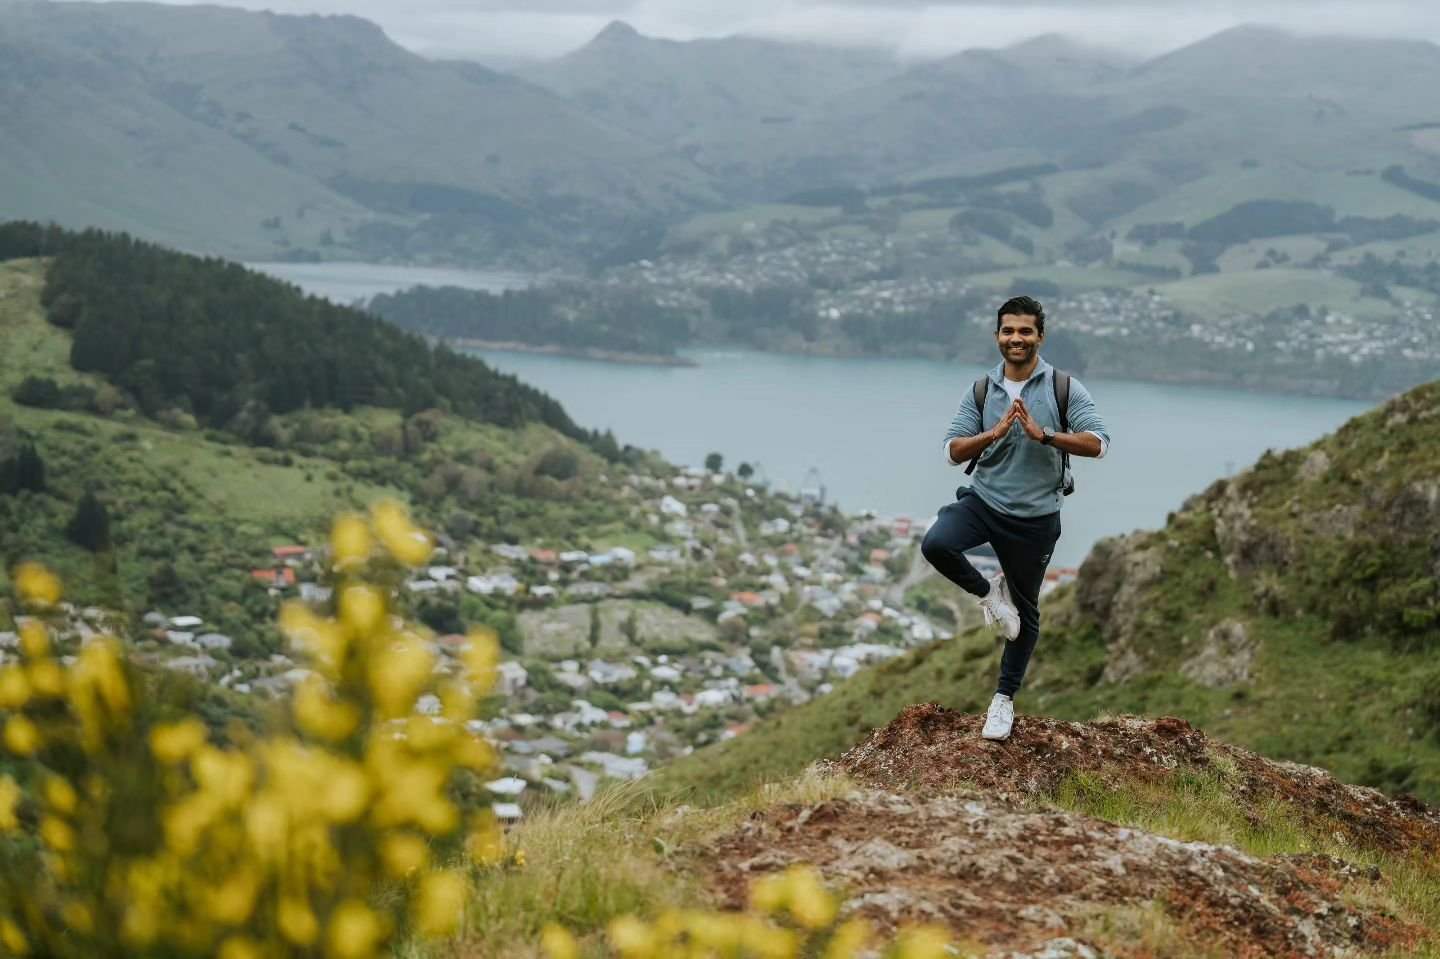 Christchurch Saga: Day 1, Thrill #2 🌟 

Namaskar Fam 🙏🏽

Here's the highlights of my 2nd adventure from my 1st day in Christchurch 🙂

I did this adventure right after exploring Lyttleton Saturday Market and this fun hike took me around 40 minutes